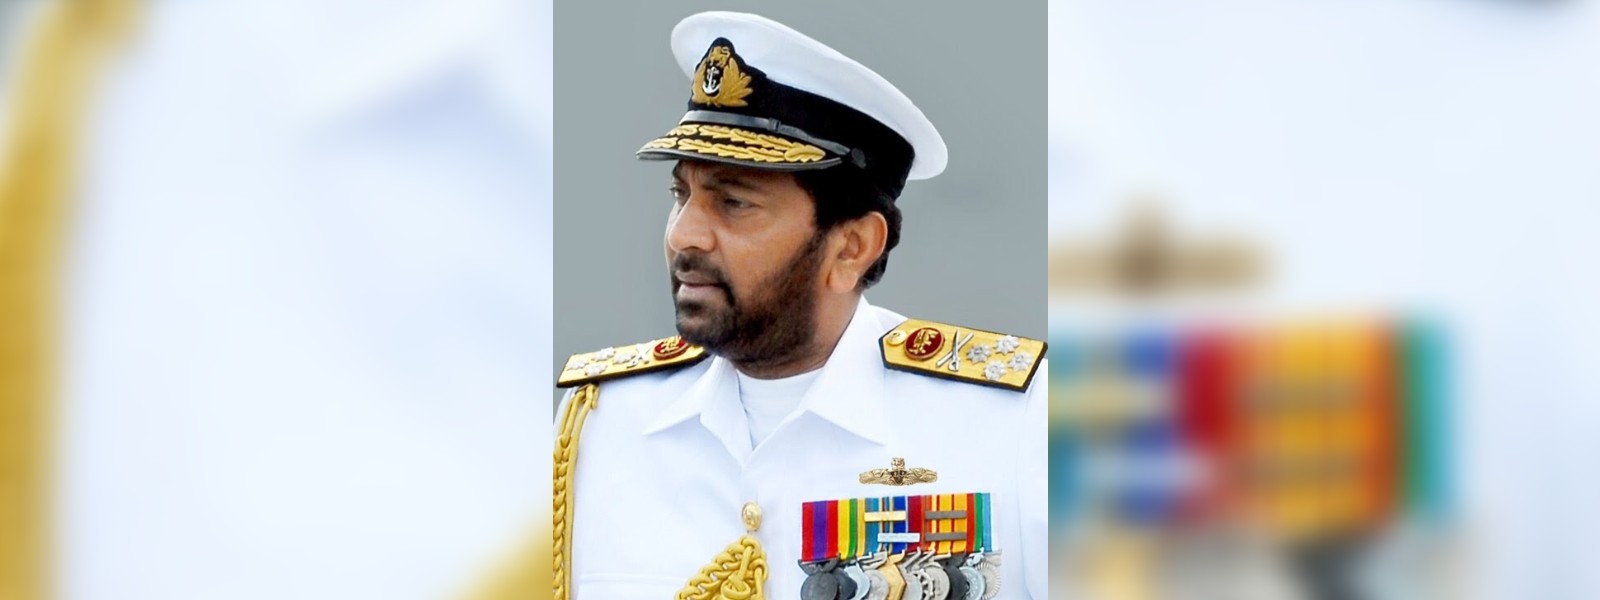 Summons issued for the 03rd time on Admiral of the Fleet Wasantha Karannagoda